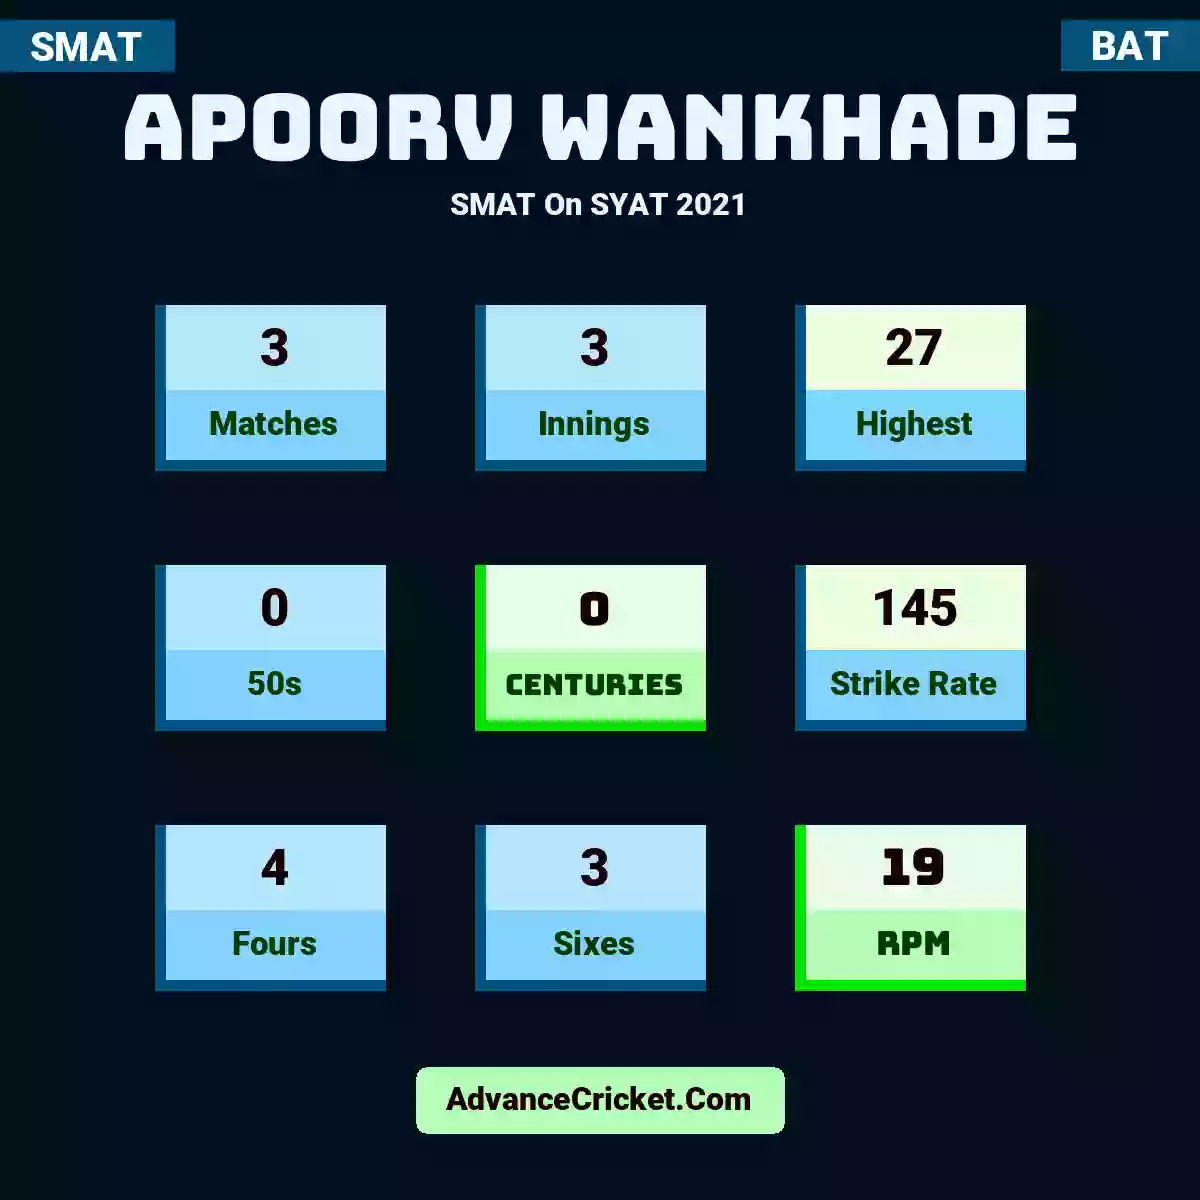 Apoorv Wankhade SMAT  On SYAT 2021, Apoorv Wankhade played 3 matches, scored 27 runs as highest, 0 half-centuries, and 0 centuries, with a strike rate of 145. A.Wankhade hit 4 fours and 3 sixes, with an RPM of 19.